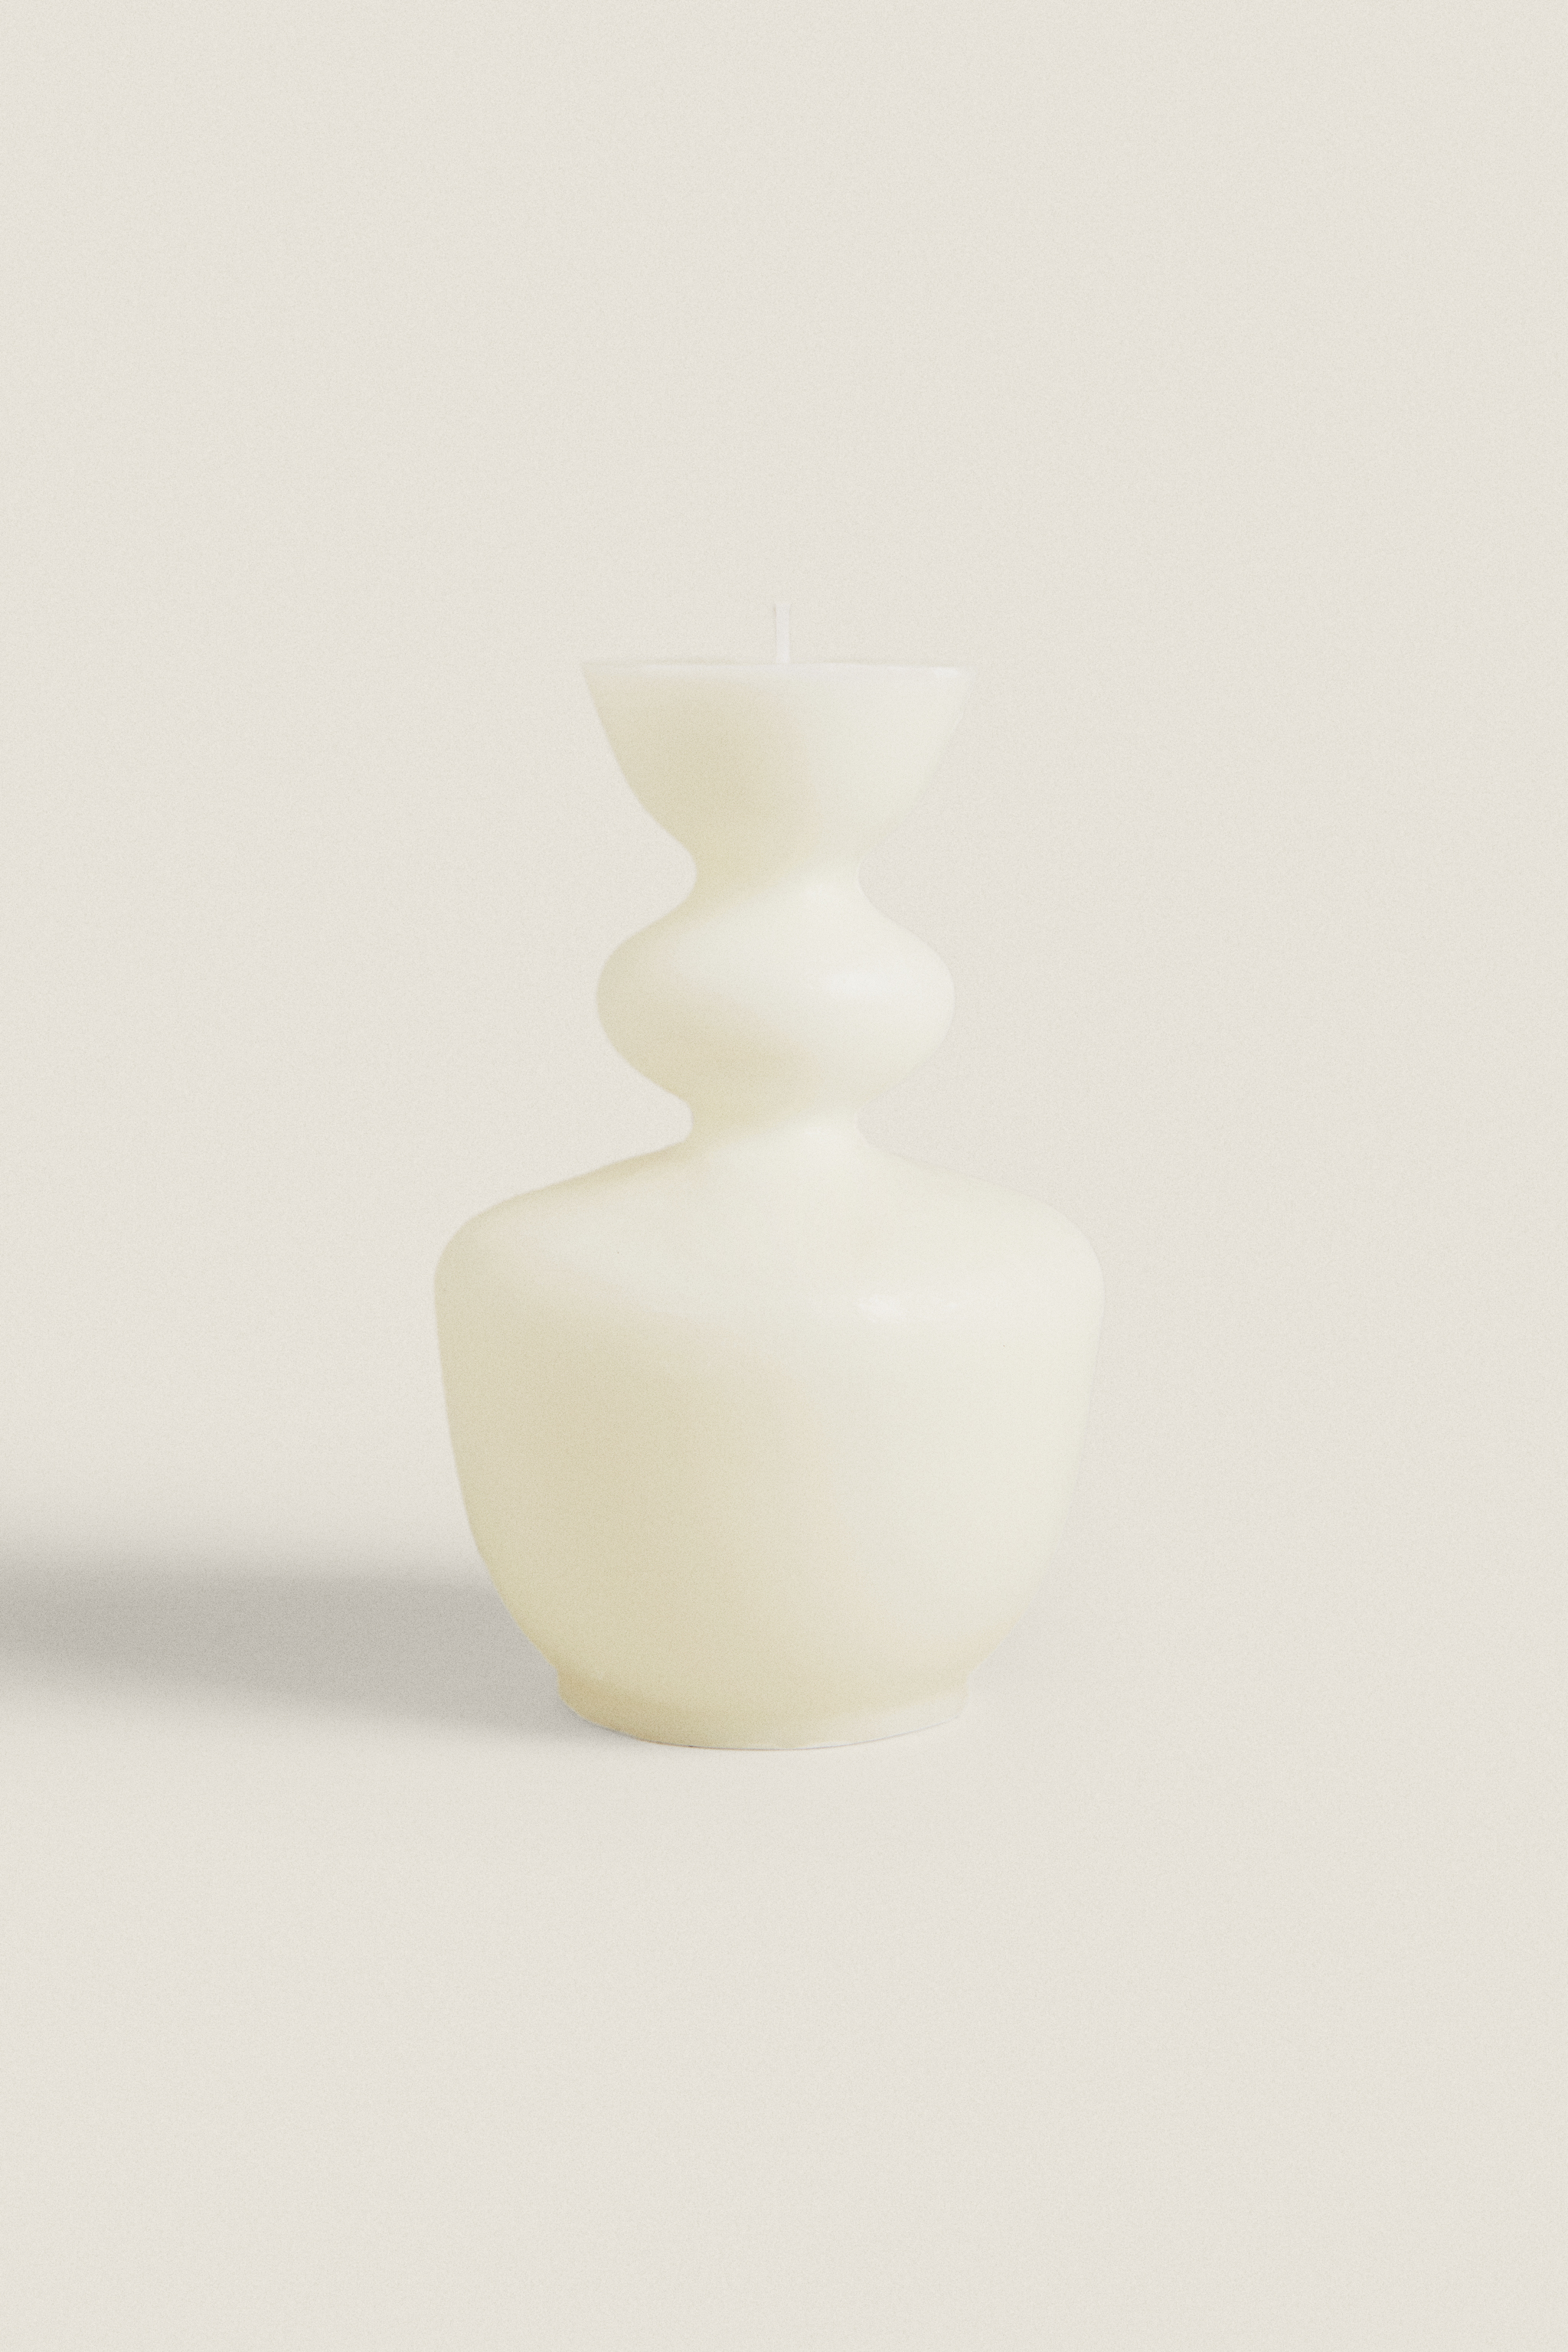 G) WHITE PETALS SCENTED CANDLE CANDLESTICK